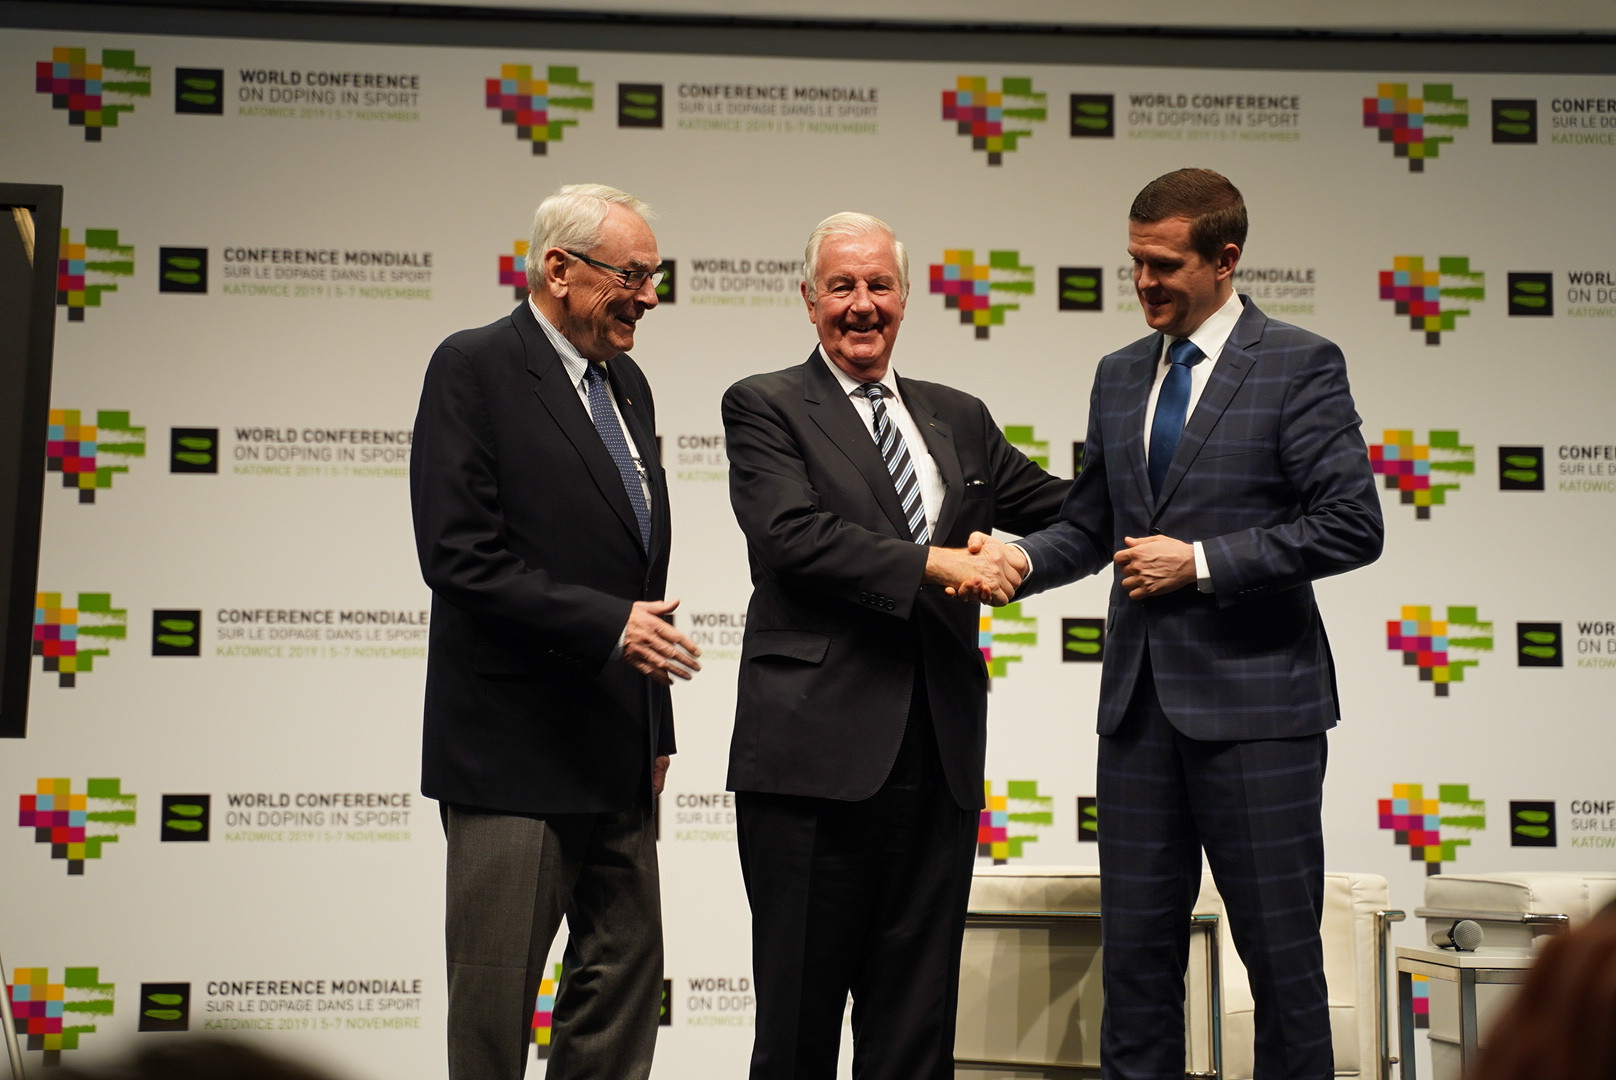 WADA's founding President Richard Pound, left, was full of praise for Sir Craig Reedie, centre, as he prepared to hand over to Witold Bańka, right, as head of the organisation ©WADA